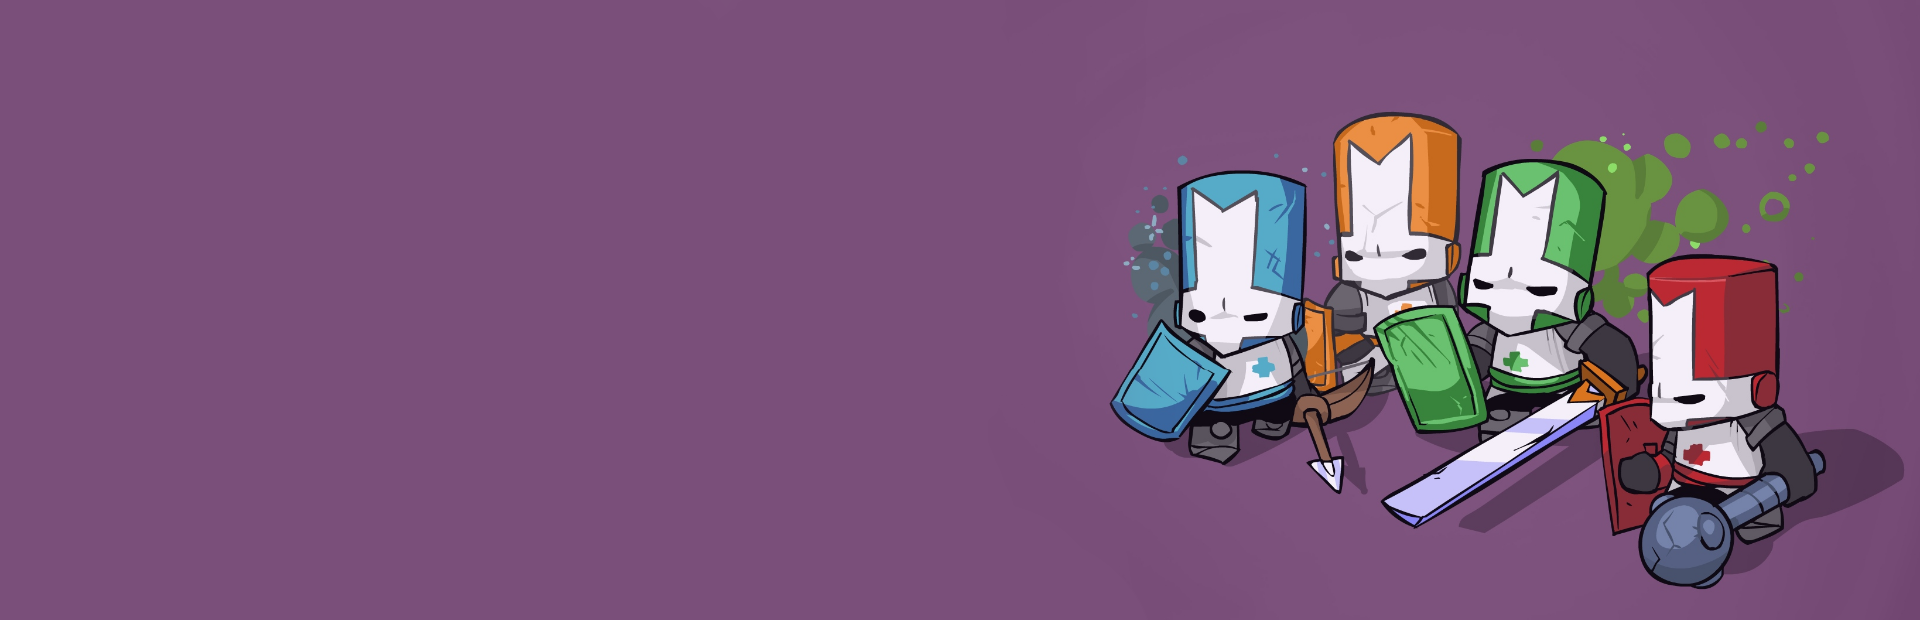 Castle Crashers at the best price